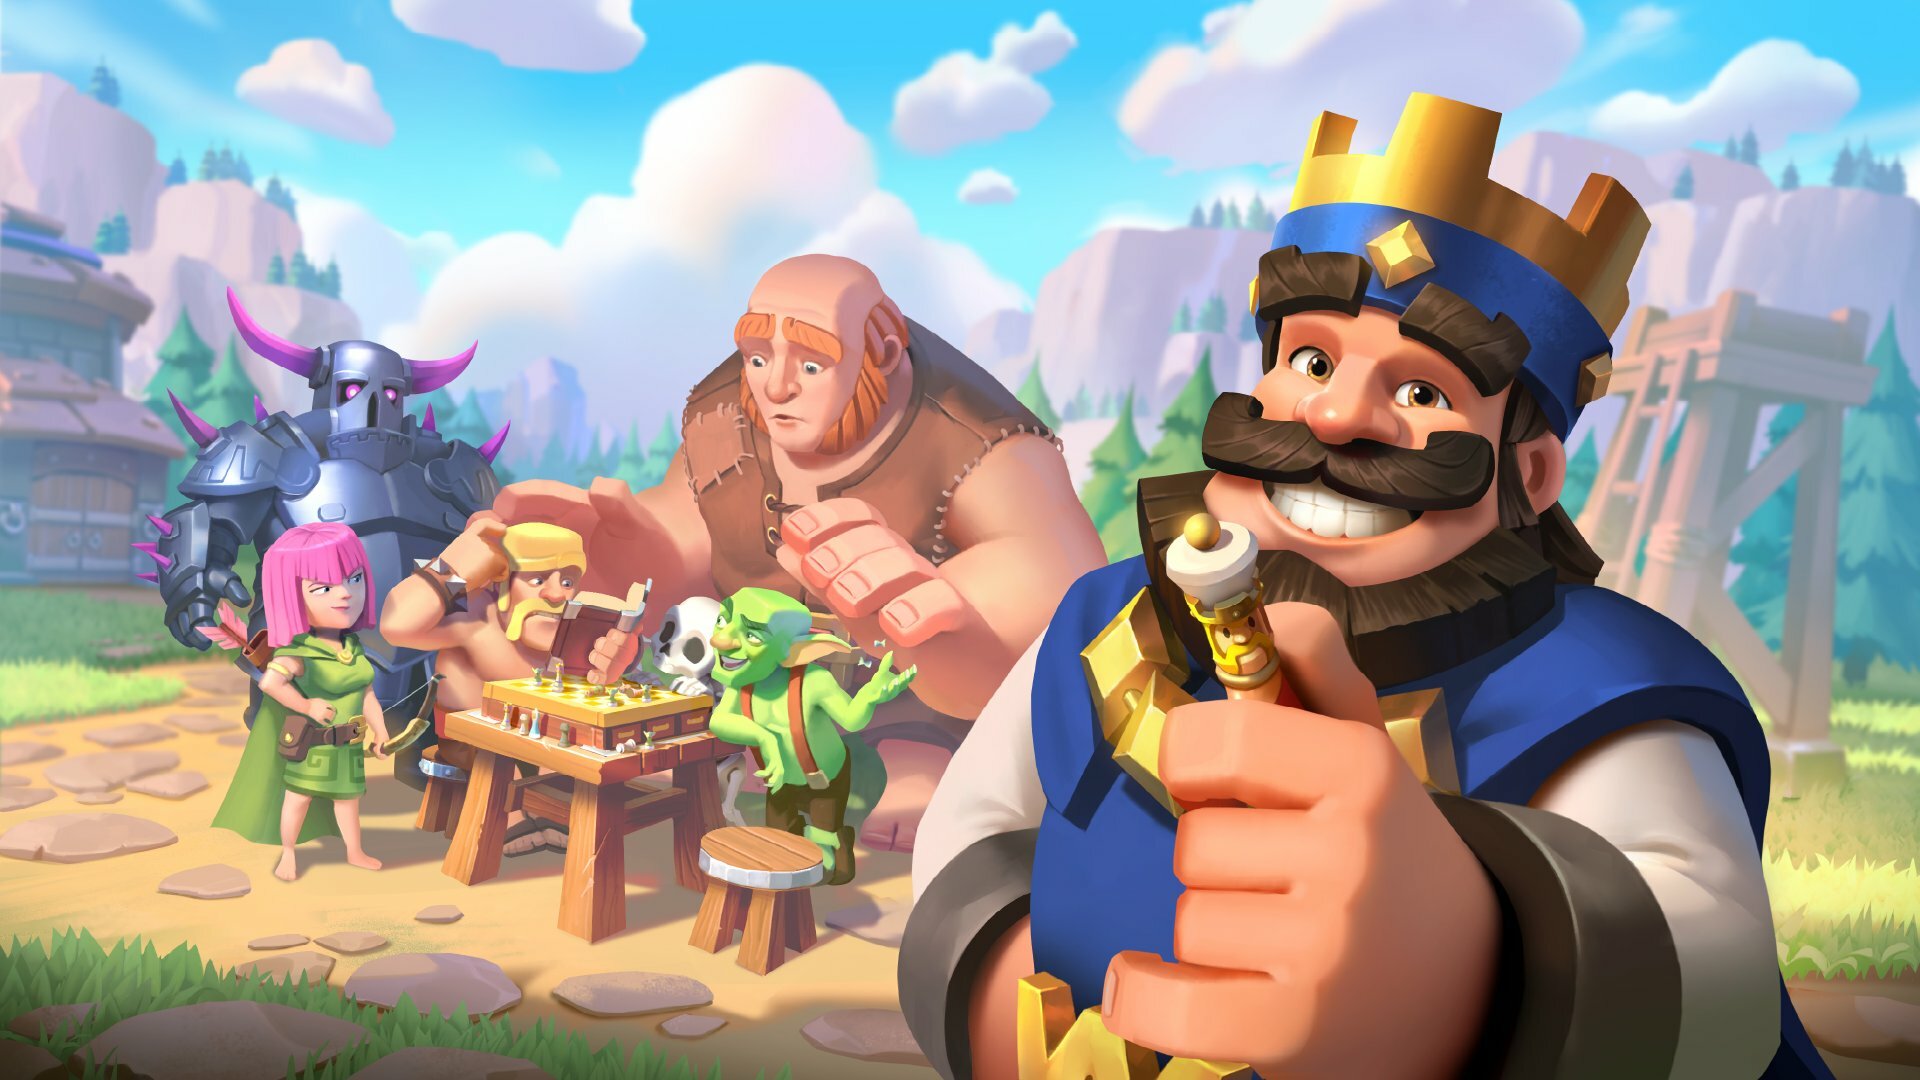 All Supercell Creator Codes for Clash of Clans, Clash Royale & Brawl Stars  - Charlie INTEL